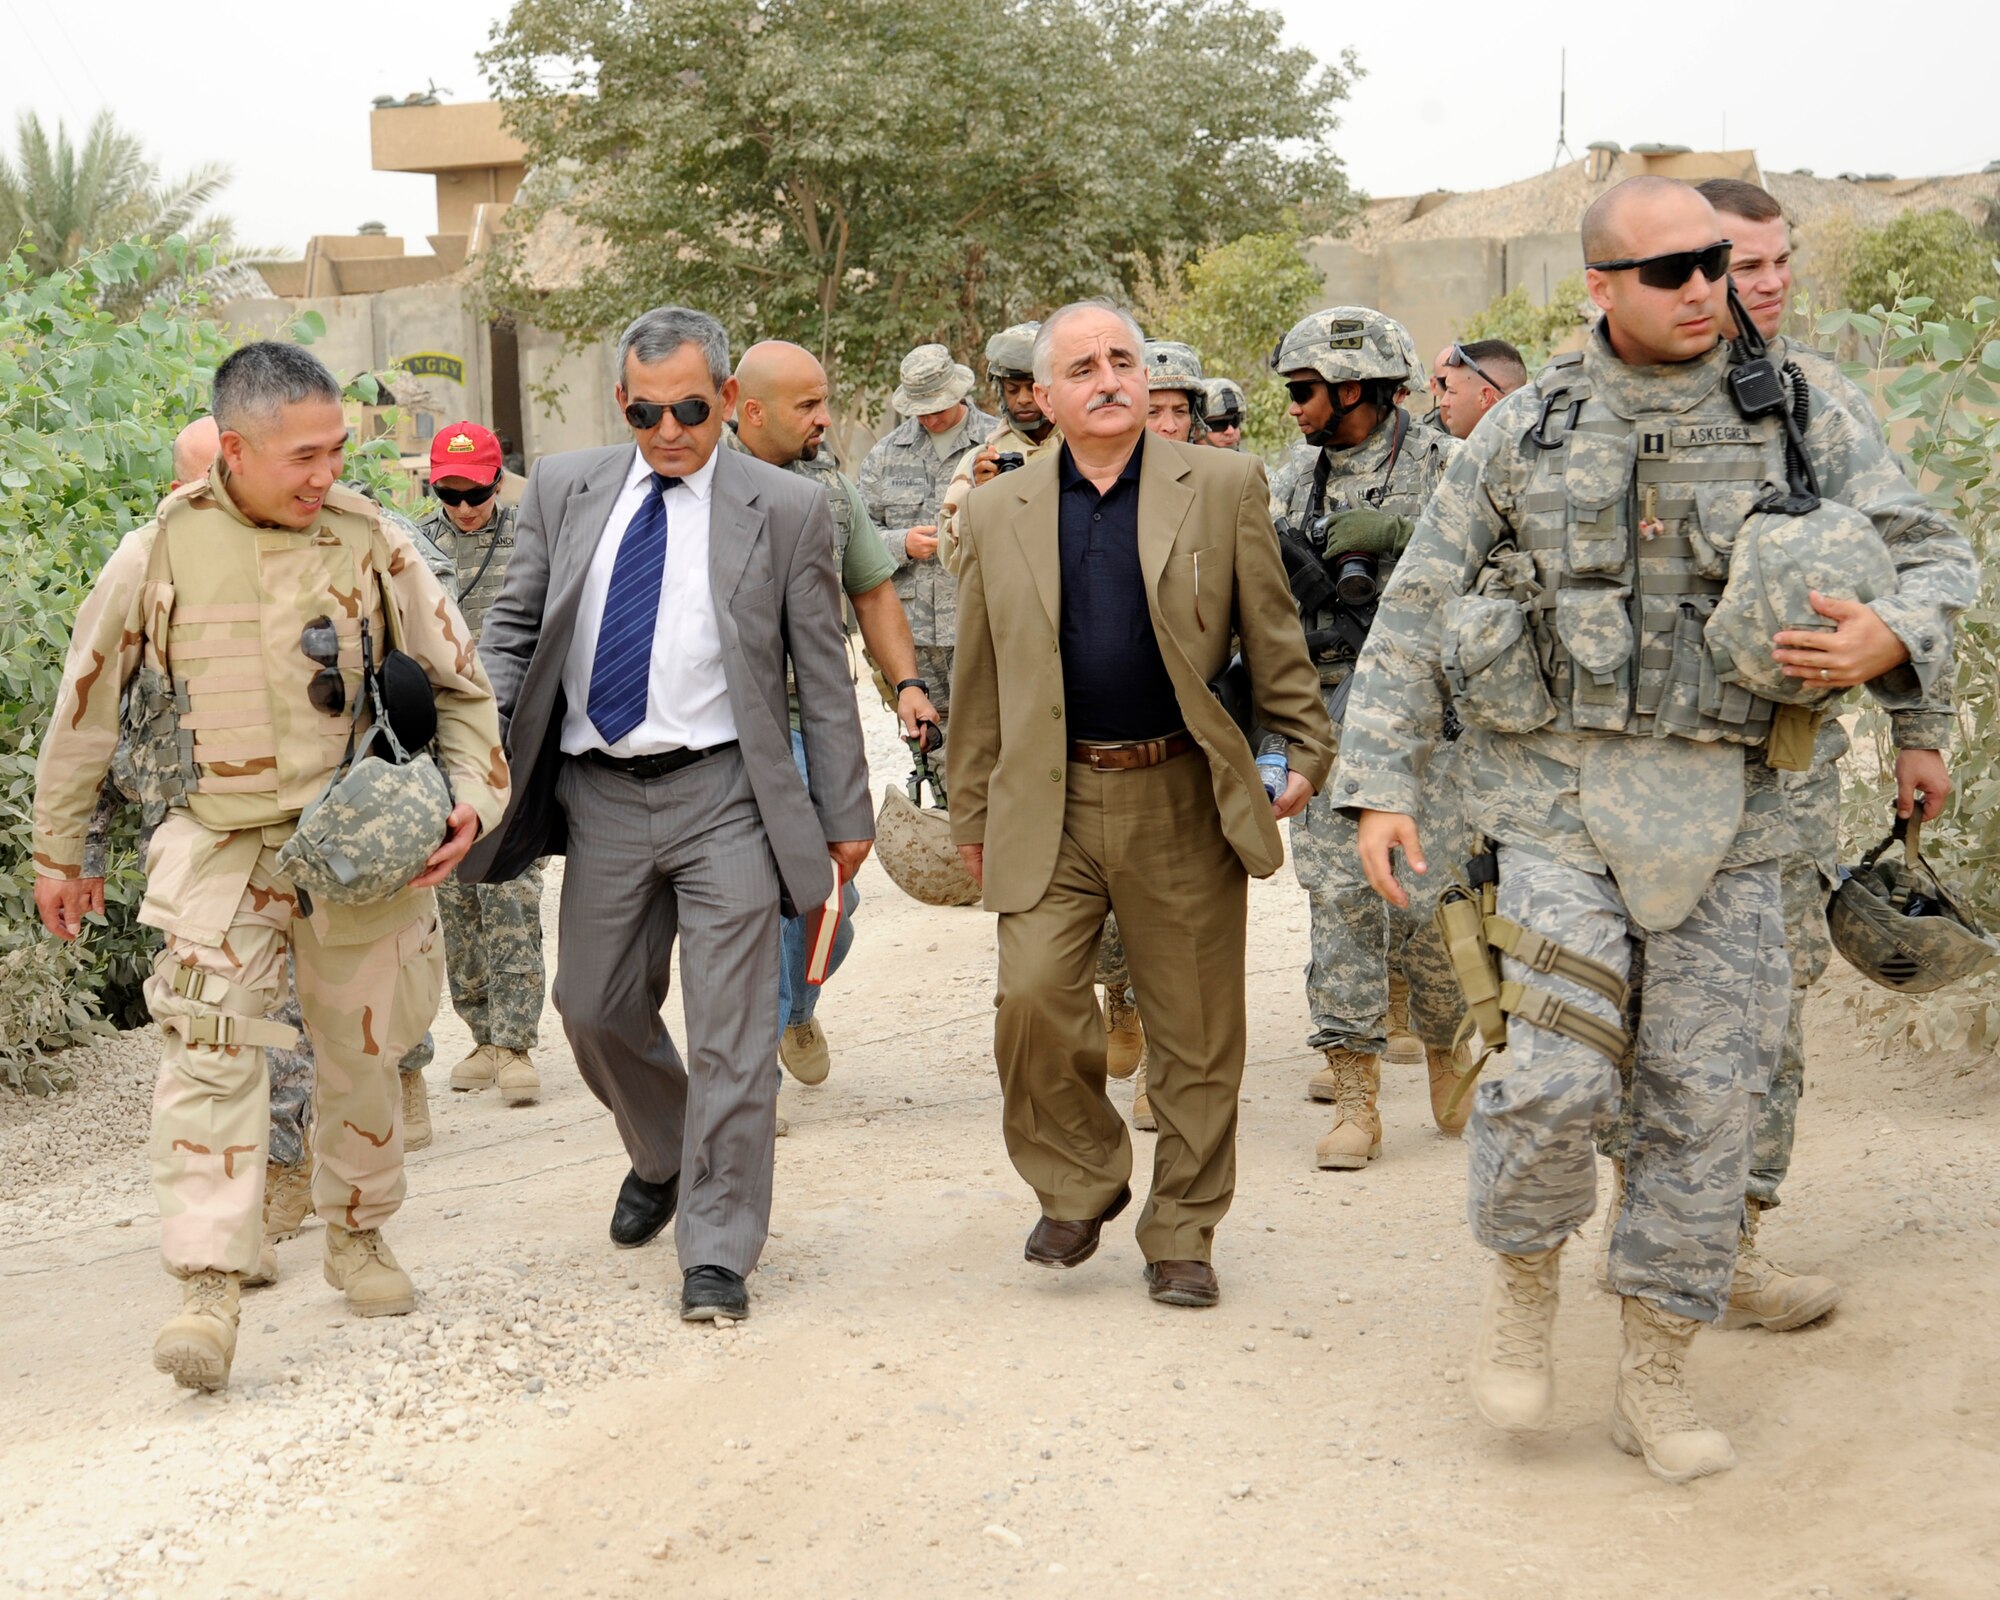 HAWR RAJAB, IRAQ -- L-R, U.S. Navy Capt. Brandon Chang, Multi-National Forces-Iraq CJ9, with Government of Iraq officials Khalid Shiltagh, head of Provincial Reconstruction and Husaiyn Mazid Husaiyn, right, Minister of Construction Housing, and U.S. Air Force Capt. Michael Askegren, Patrol Base Stone site officer in charge, walk to the Village of Hope school at Hawr Rajab, Iraq on Aug. 25. (U.S. Air Force photo/Staff Sgt. Paul Villanueva II)